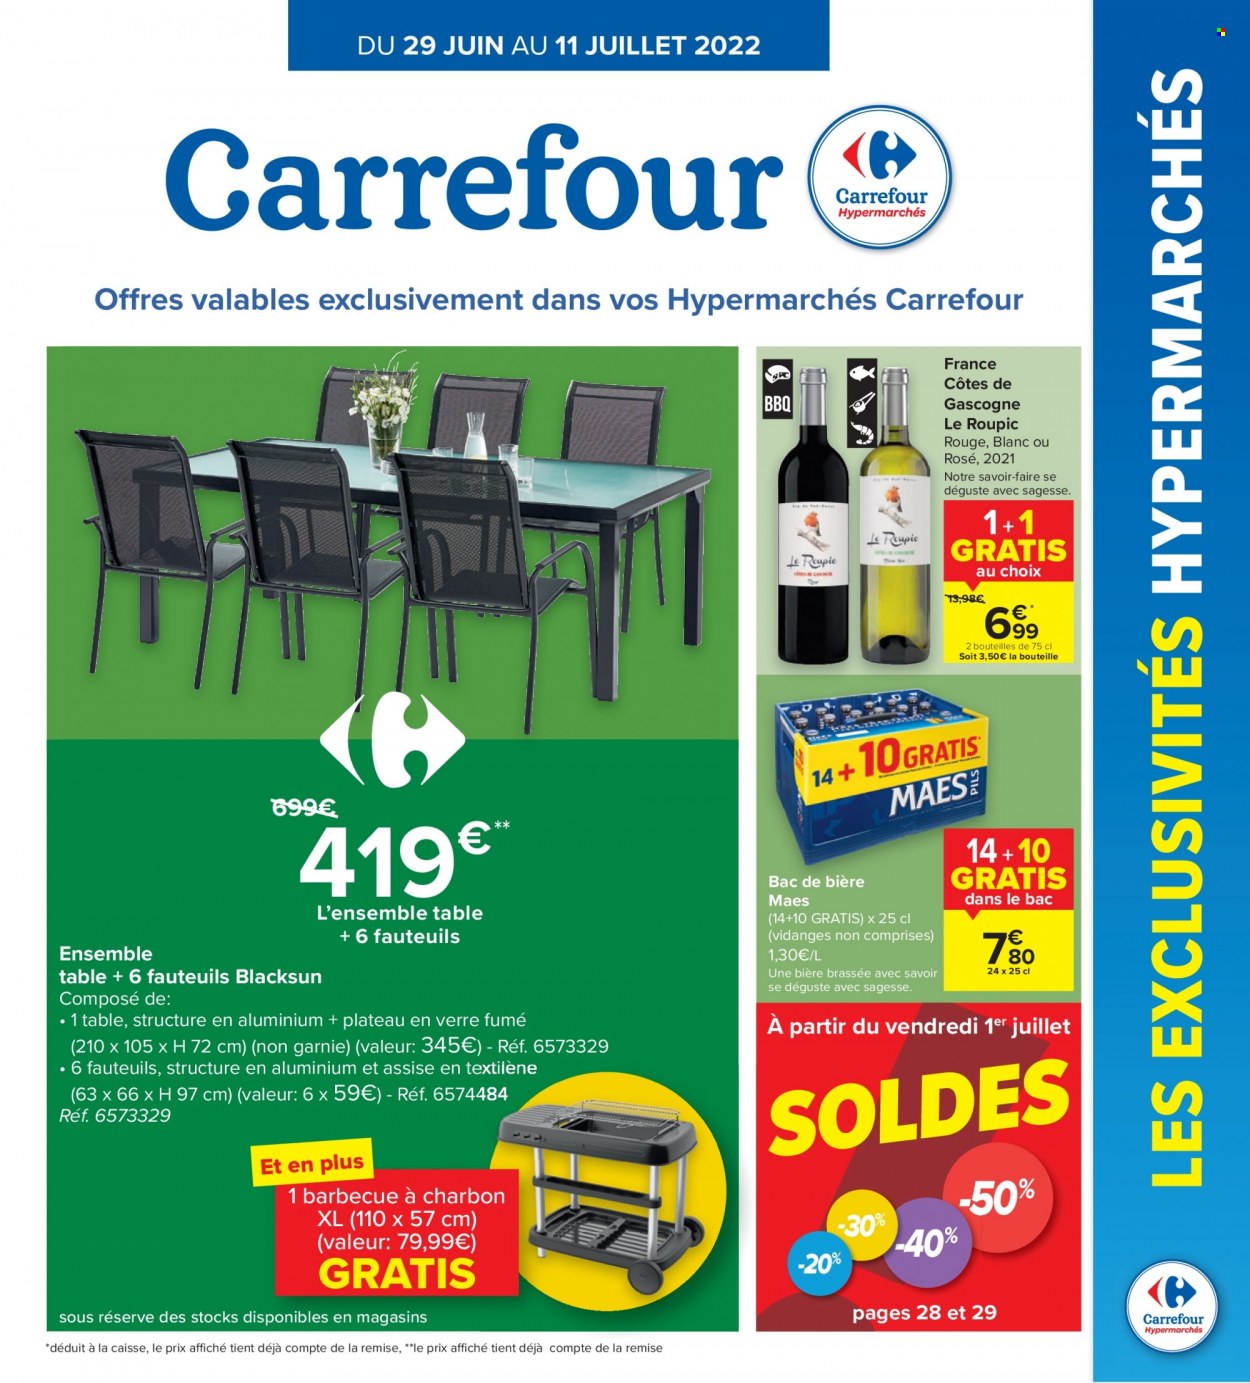 Catalogue Carrefour hypermarkt - 29.6.2022 - 11.7.2022. Page 1.